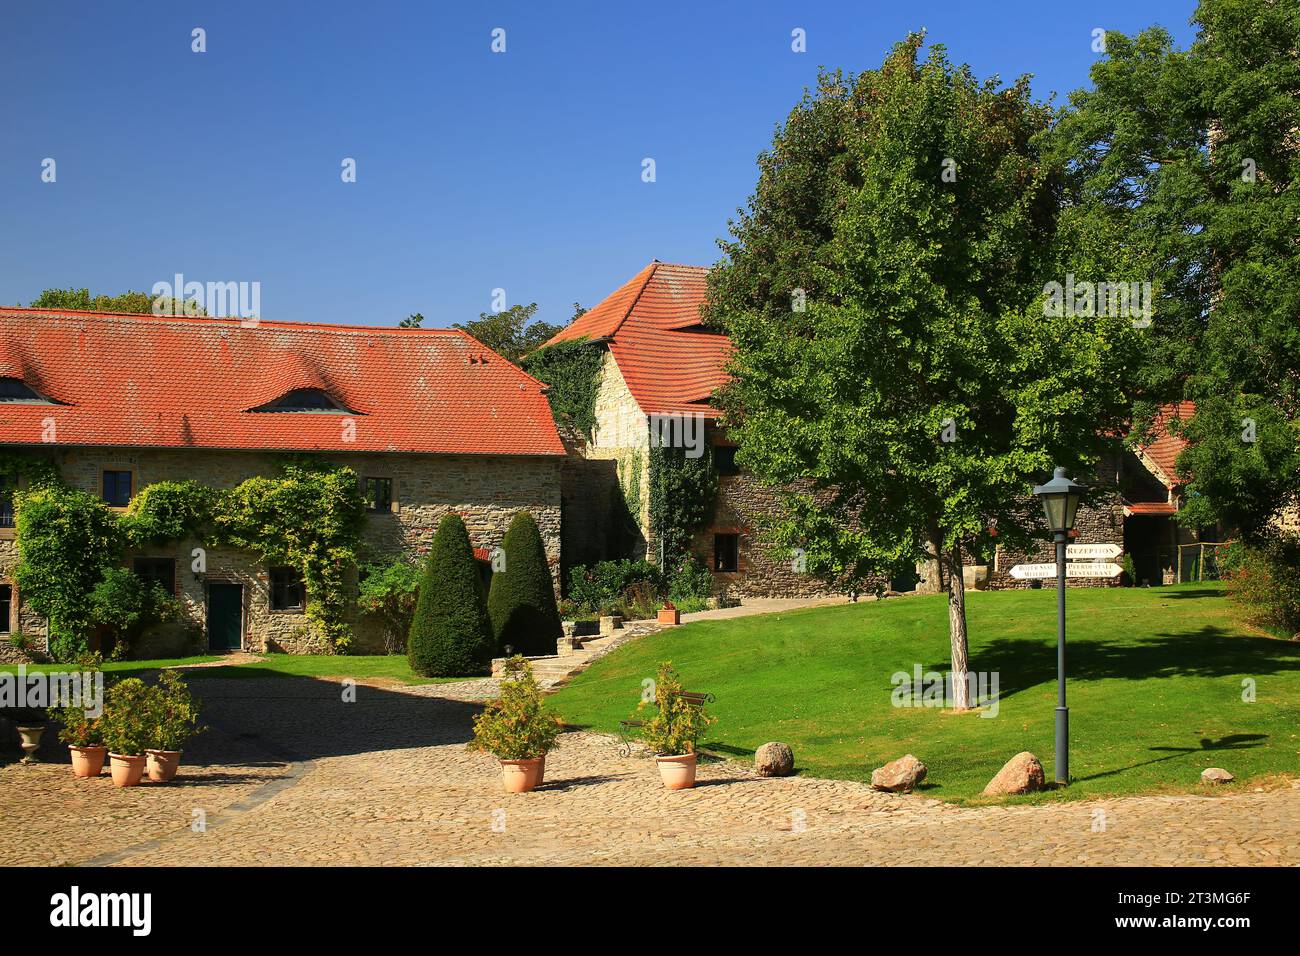 Rural scene in the old town of Wanzleben, Germany. Stock Photo